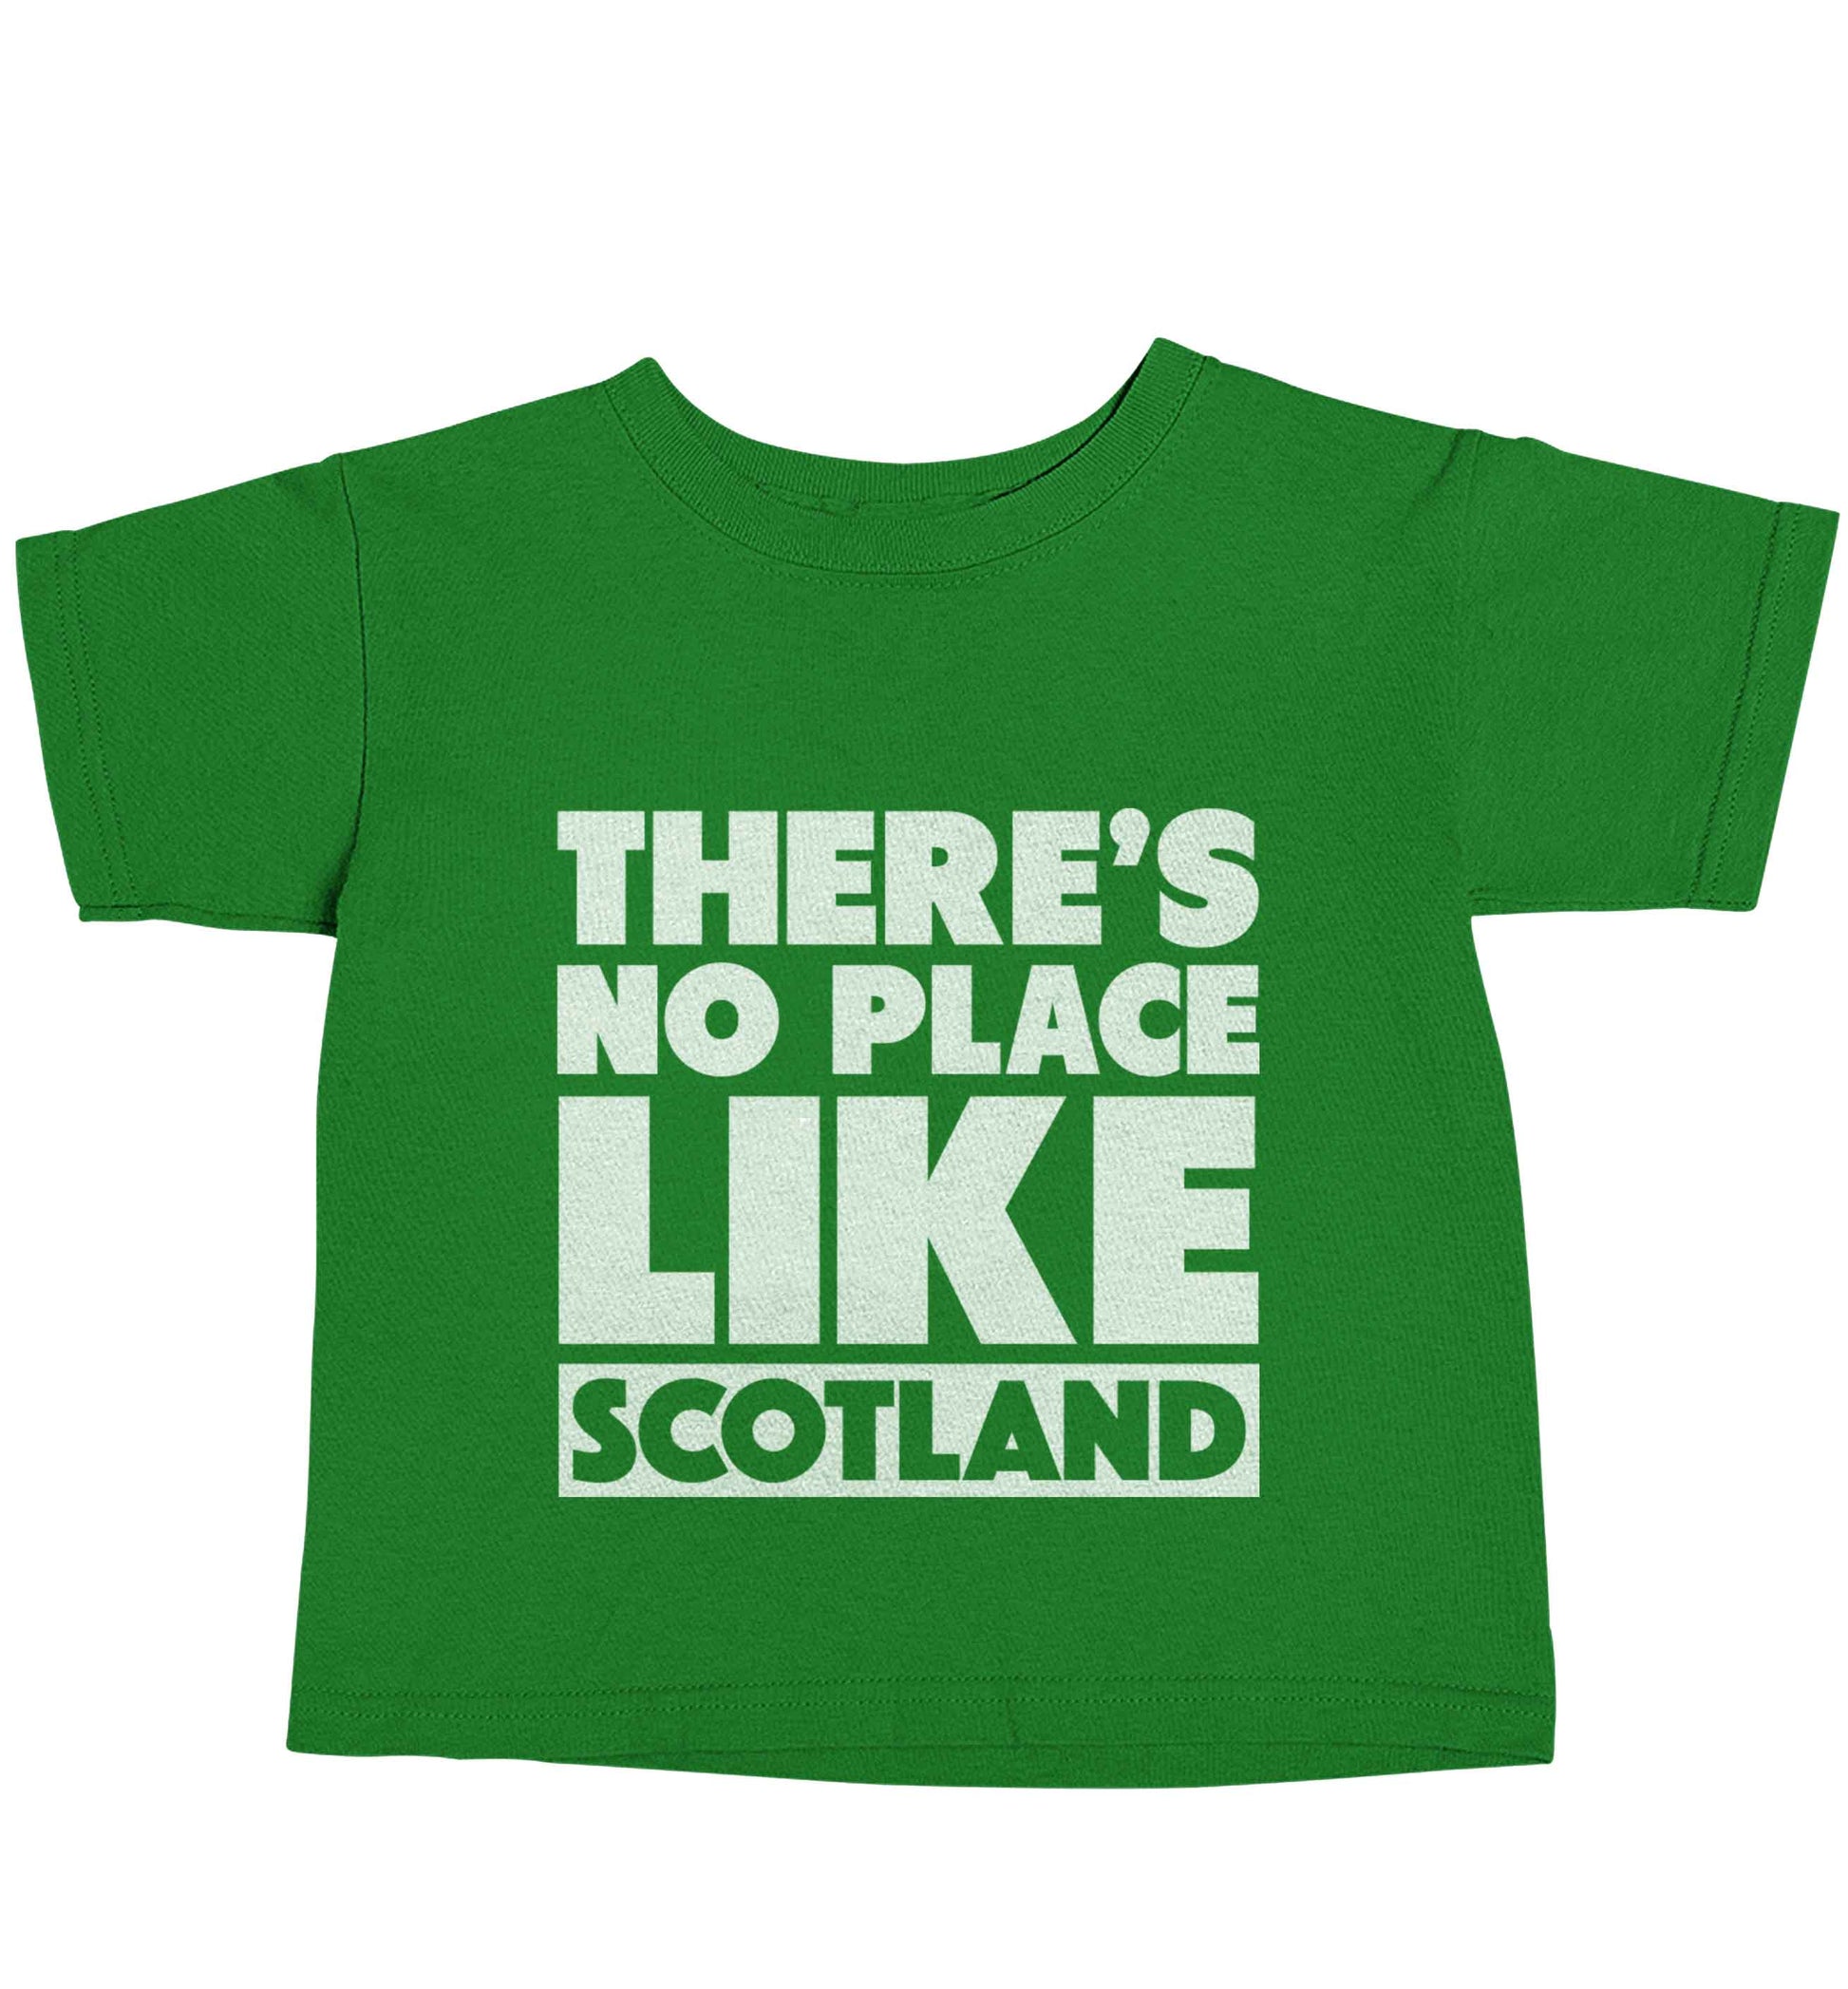 There's no place like Scotland green baby toddler Tshirt 2 Years